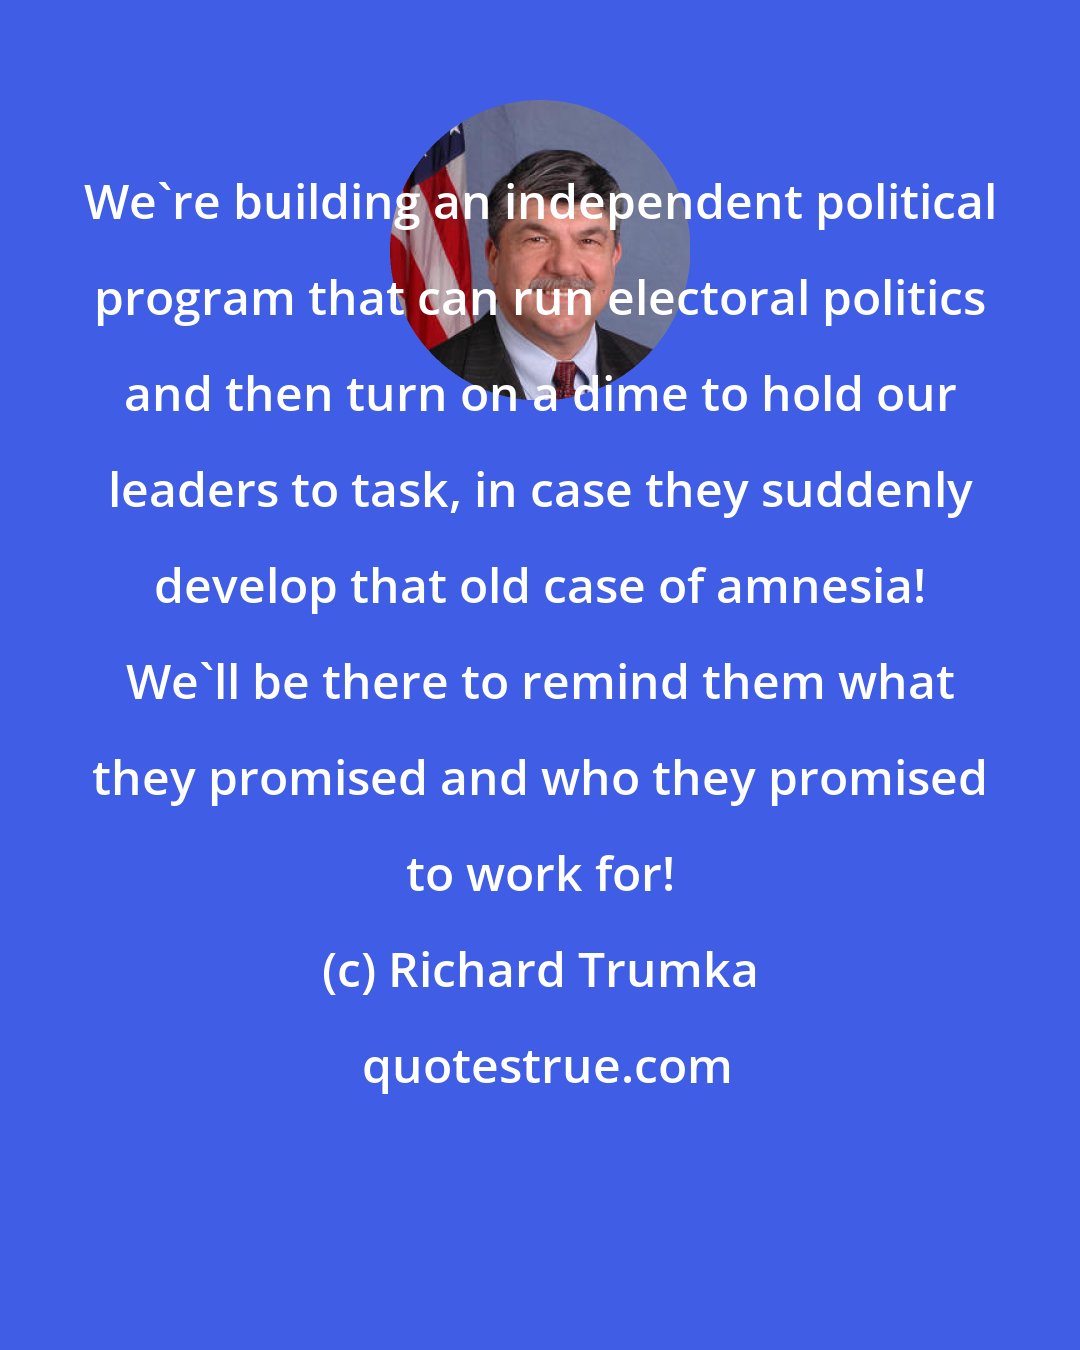 Richard Trumka: We're building an independent political program that can run electoral politics and then turn on a dime to hold our leaders to task, in case they suddenly develop that old case of amnesia! We'll be there to remind them what they promised and who they promised to work for!